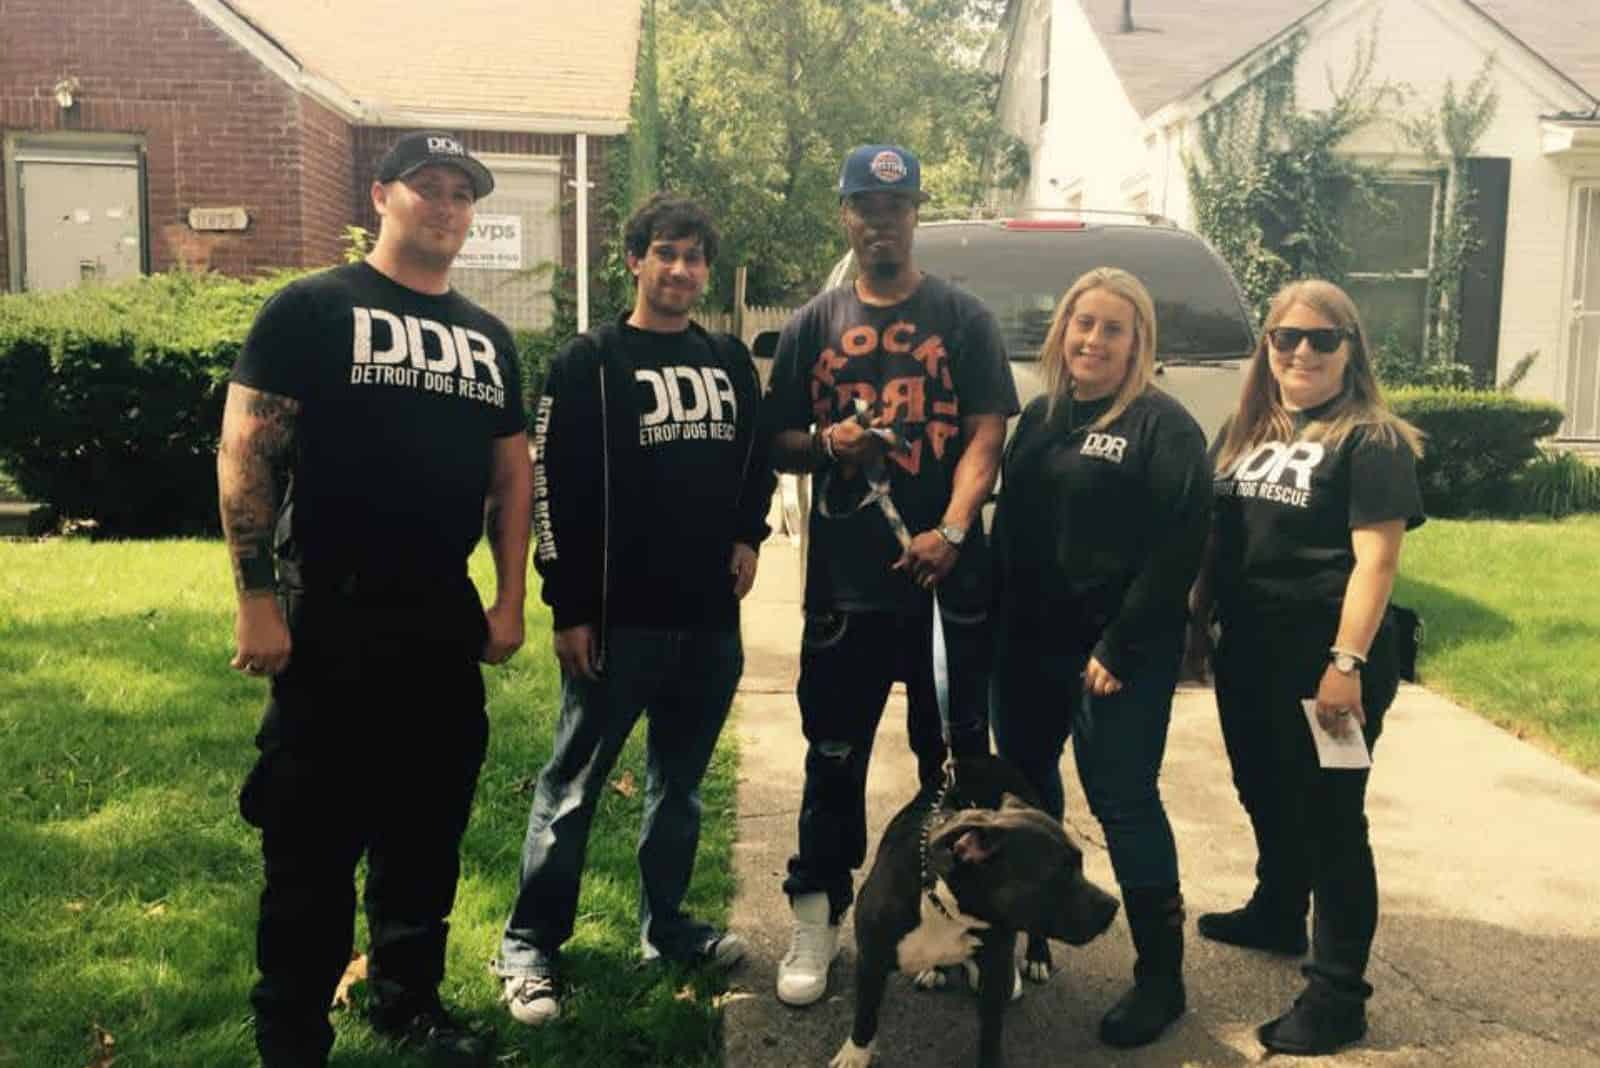 DDR staff with pitbull mix dog standing on driveway